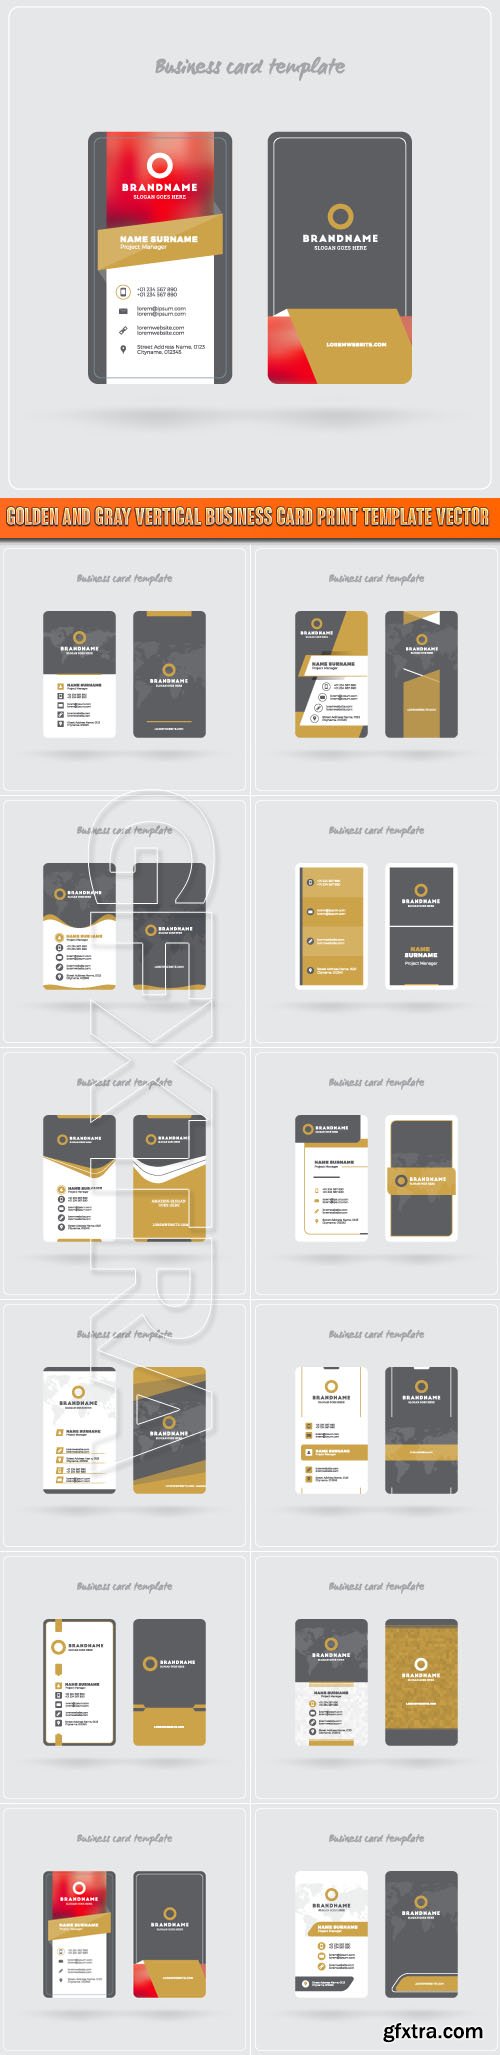 Golden and Gray Vertical Business Card Print Template vector